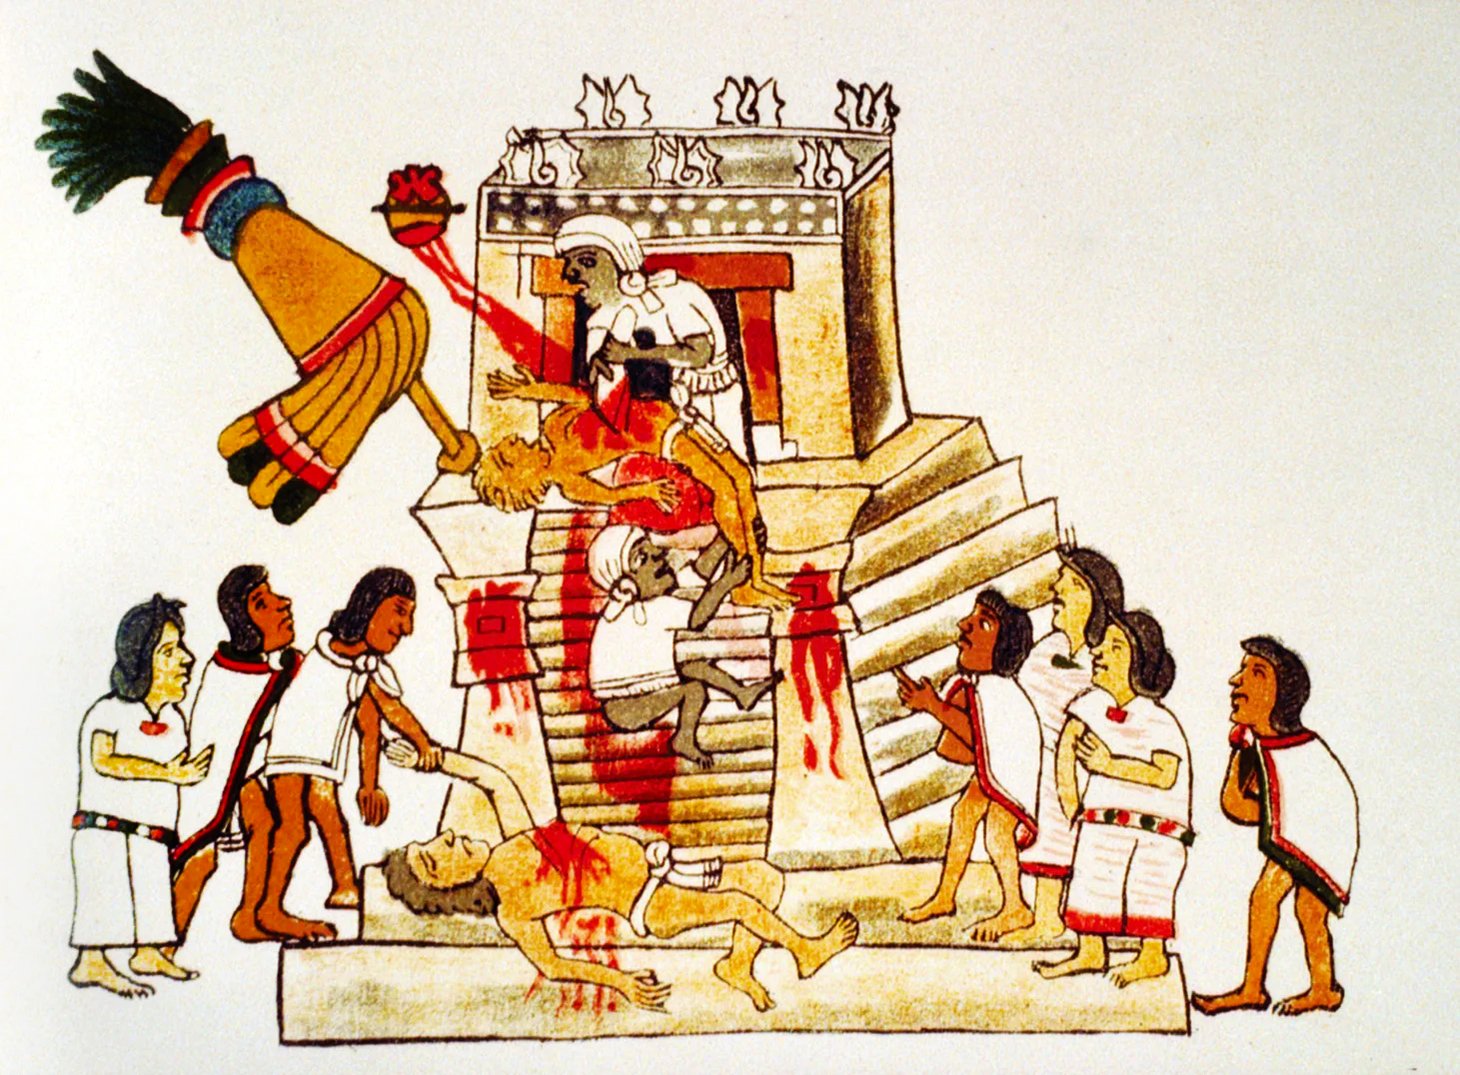 Illustration depicting an Aztec priest offering a live human heart to the war deity Huitzilopochtli, based on the Codex Magliabecchi reproduction.